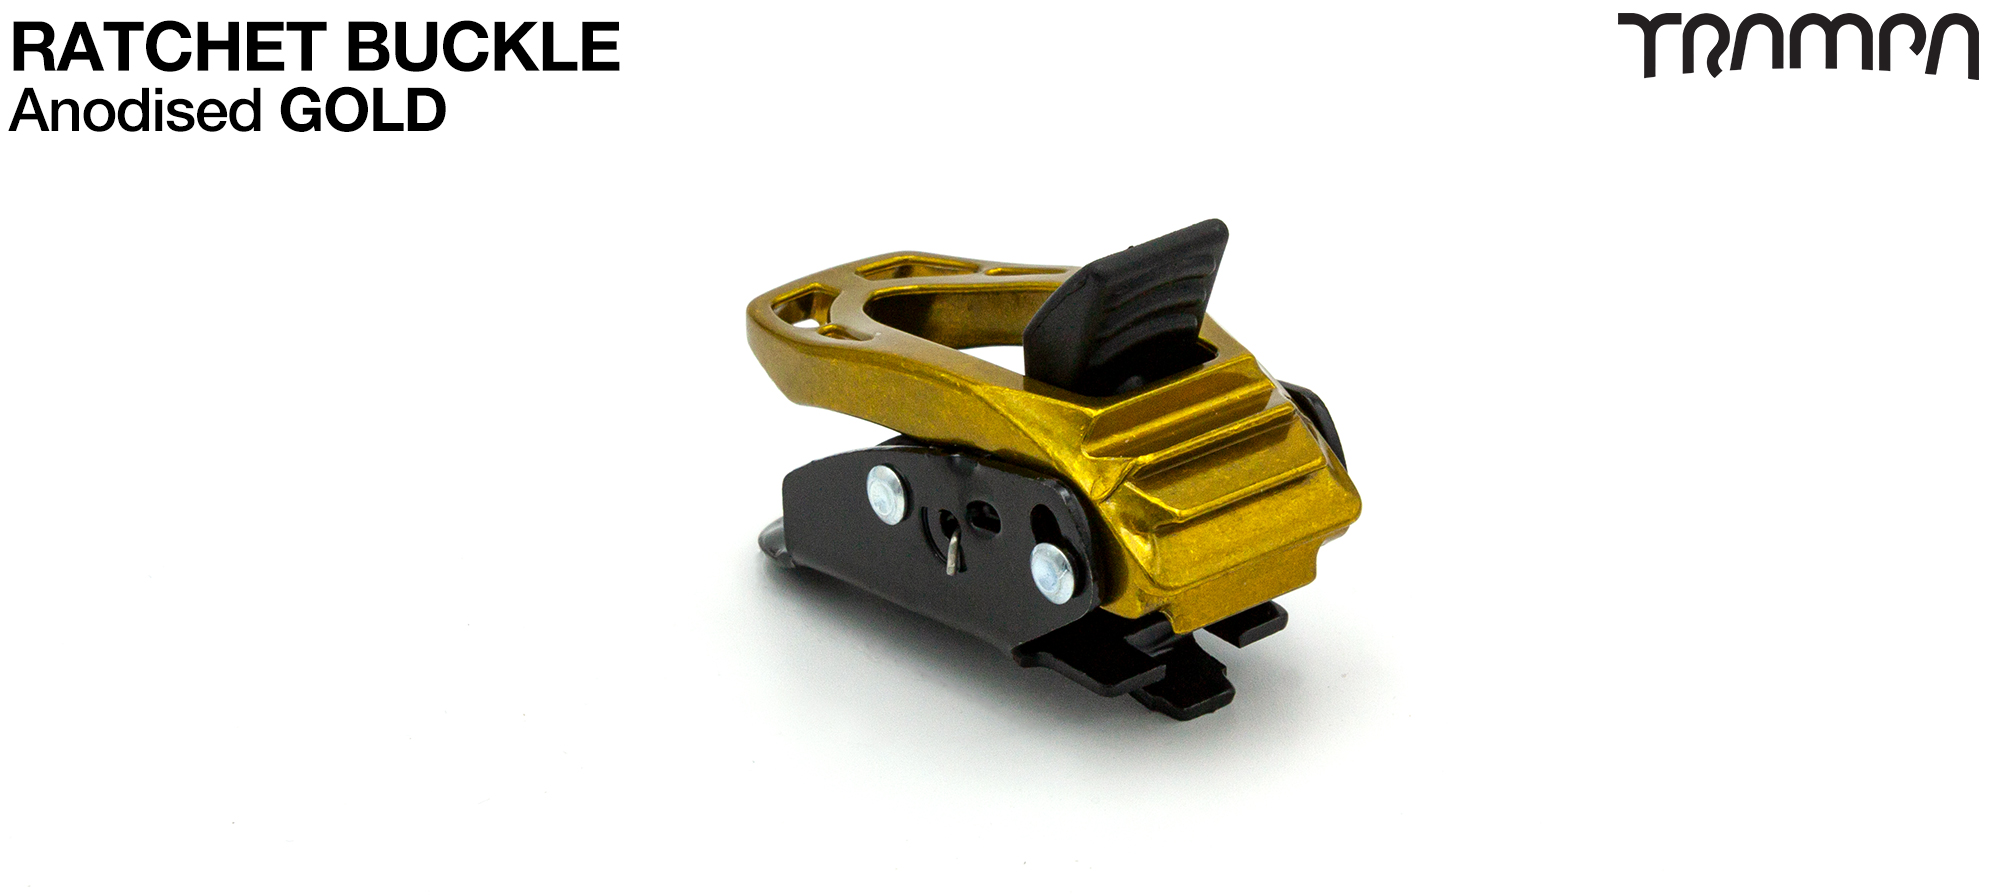 GOLD Anodised Ratchet Buckle 